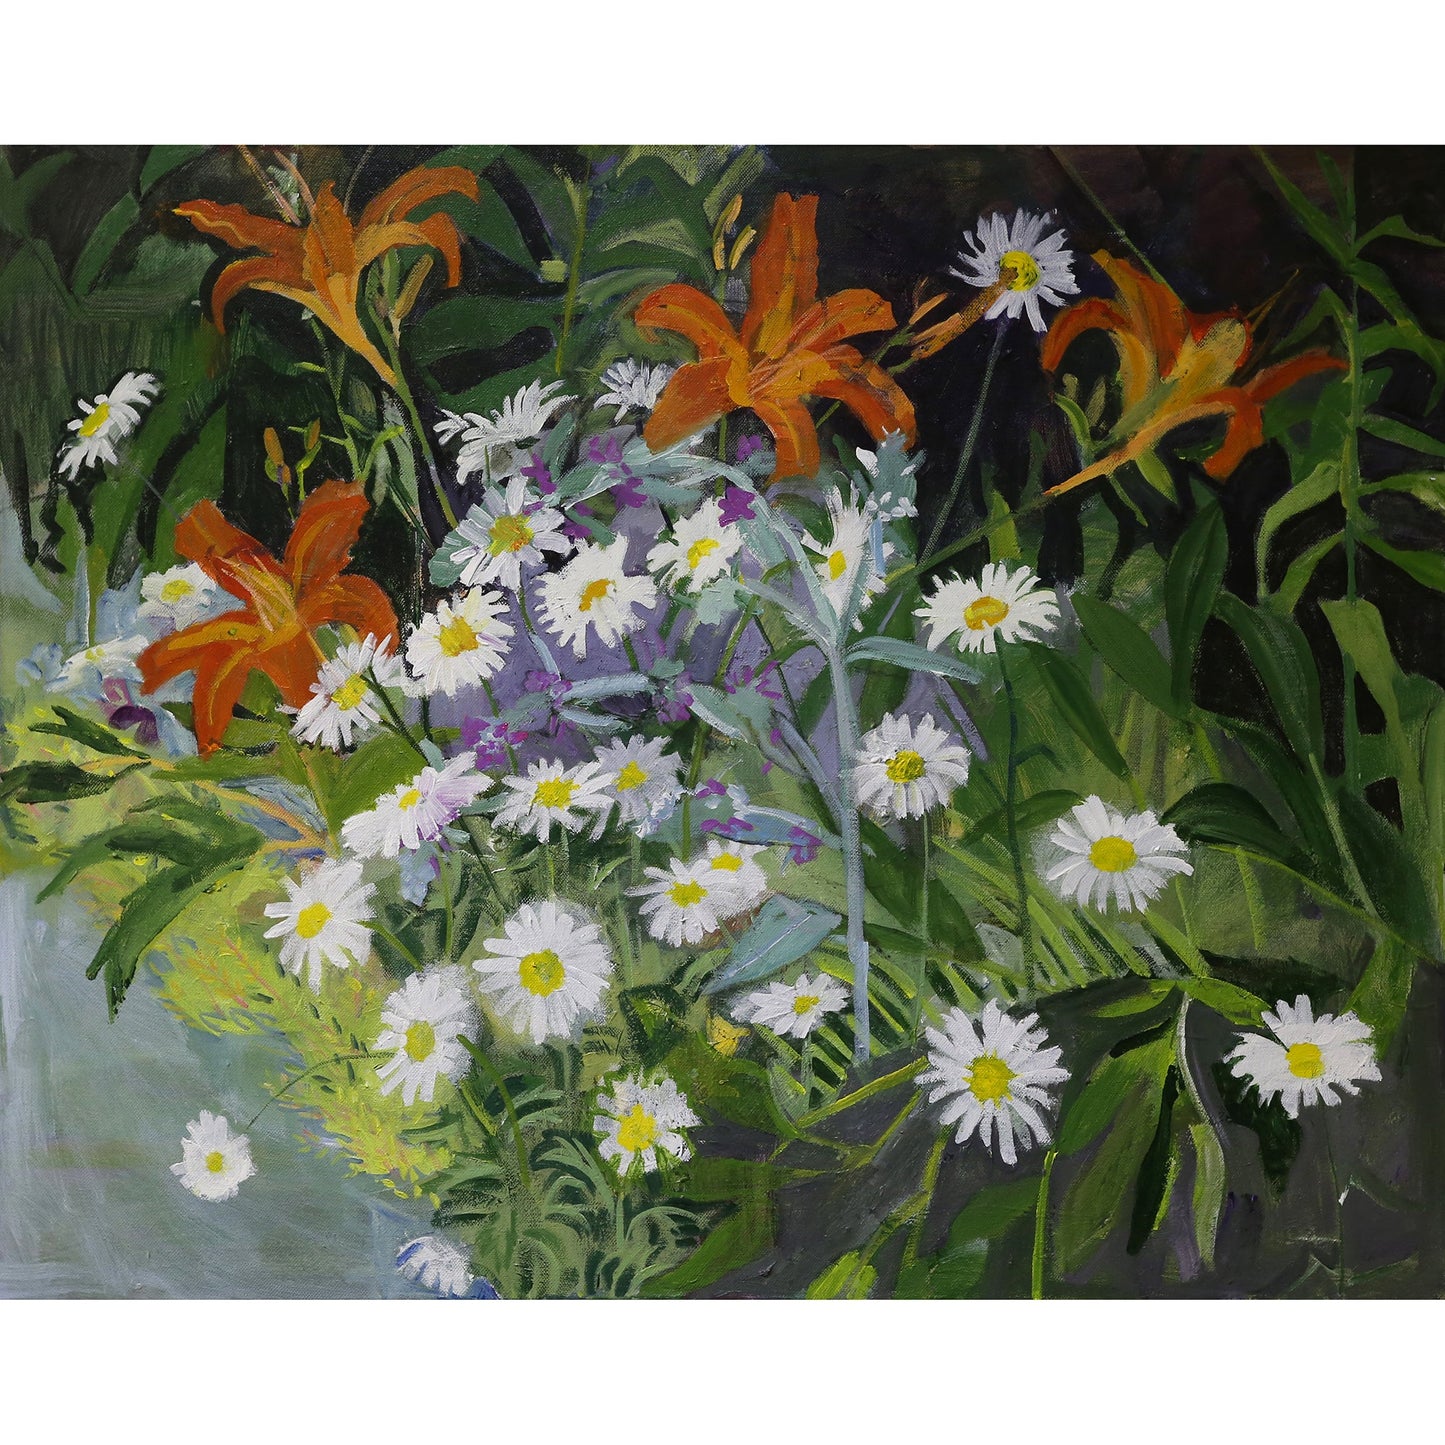 Lilies and Daisies in the Summer Garden